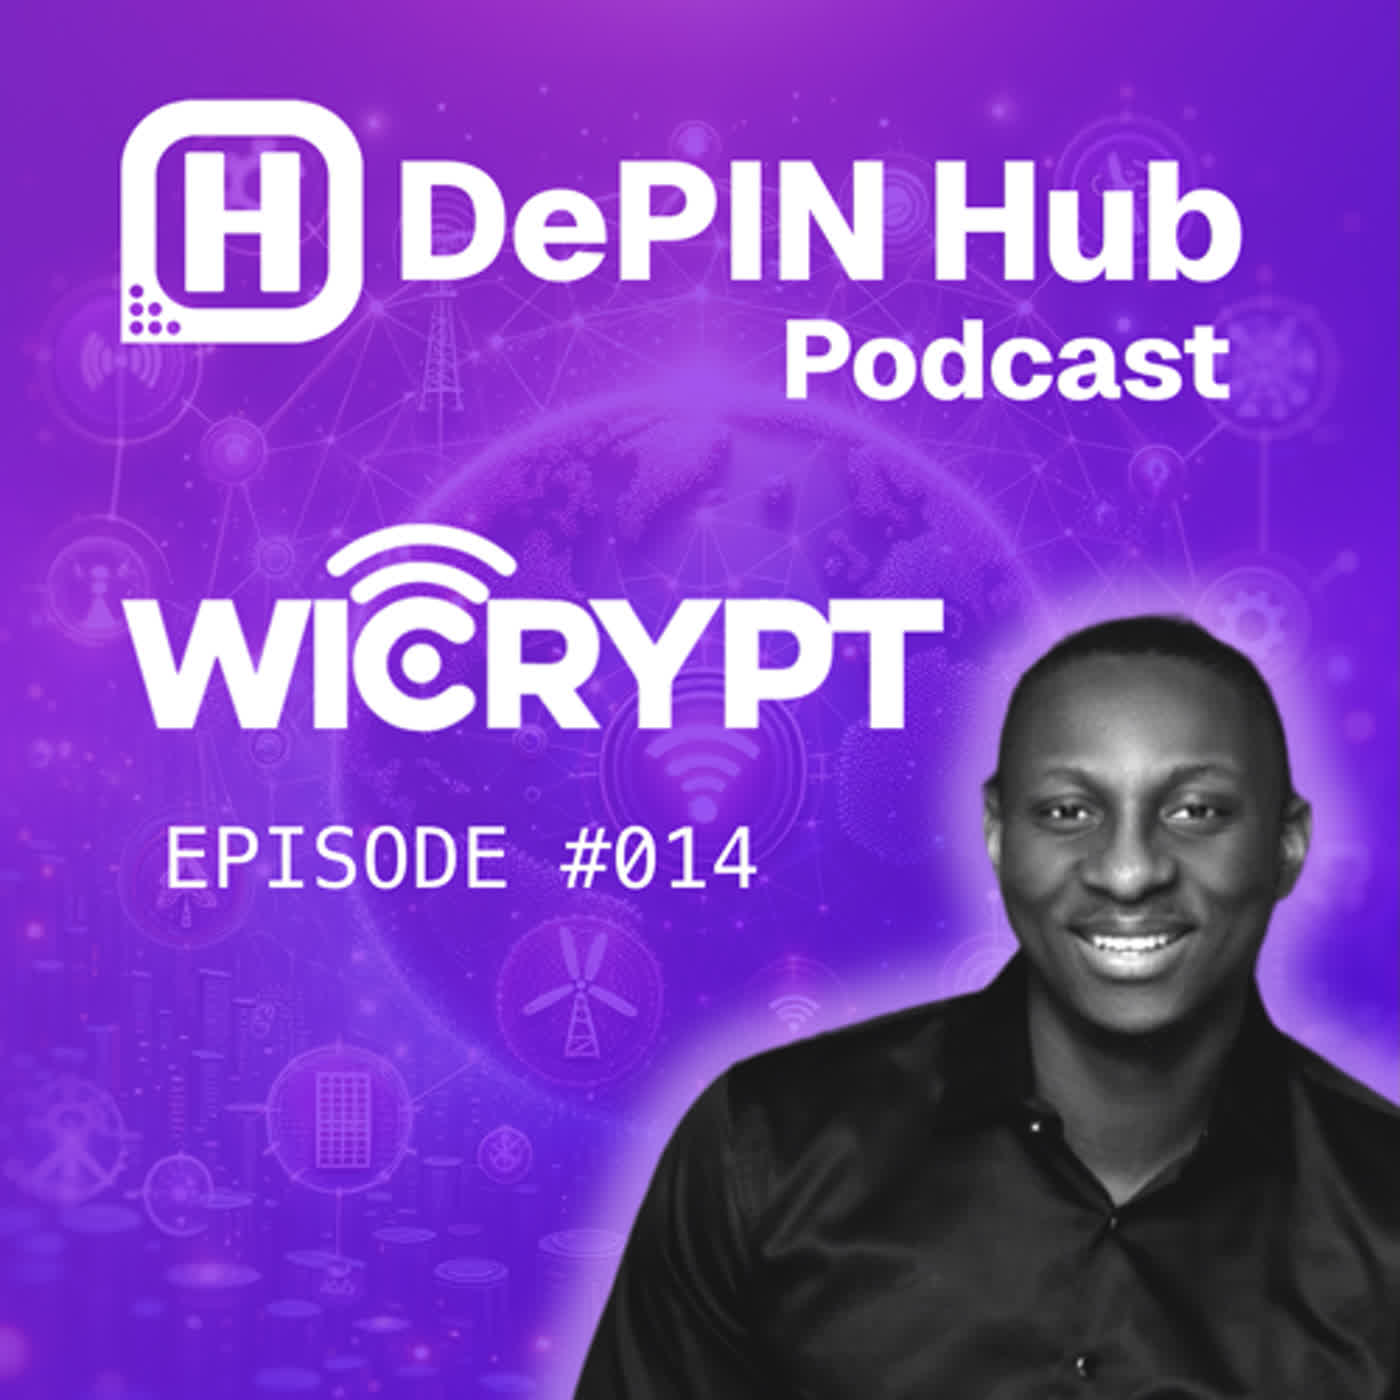 #014 - WiCrypt - Bringing internet connectivity to the masses with DePIN